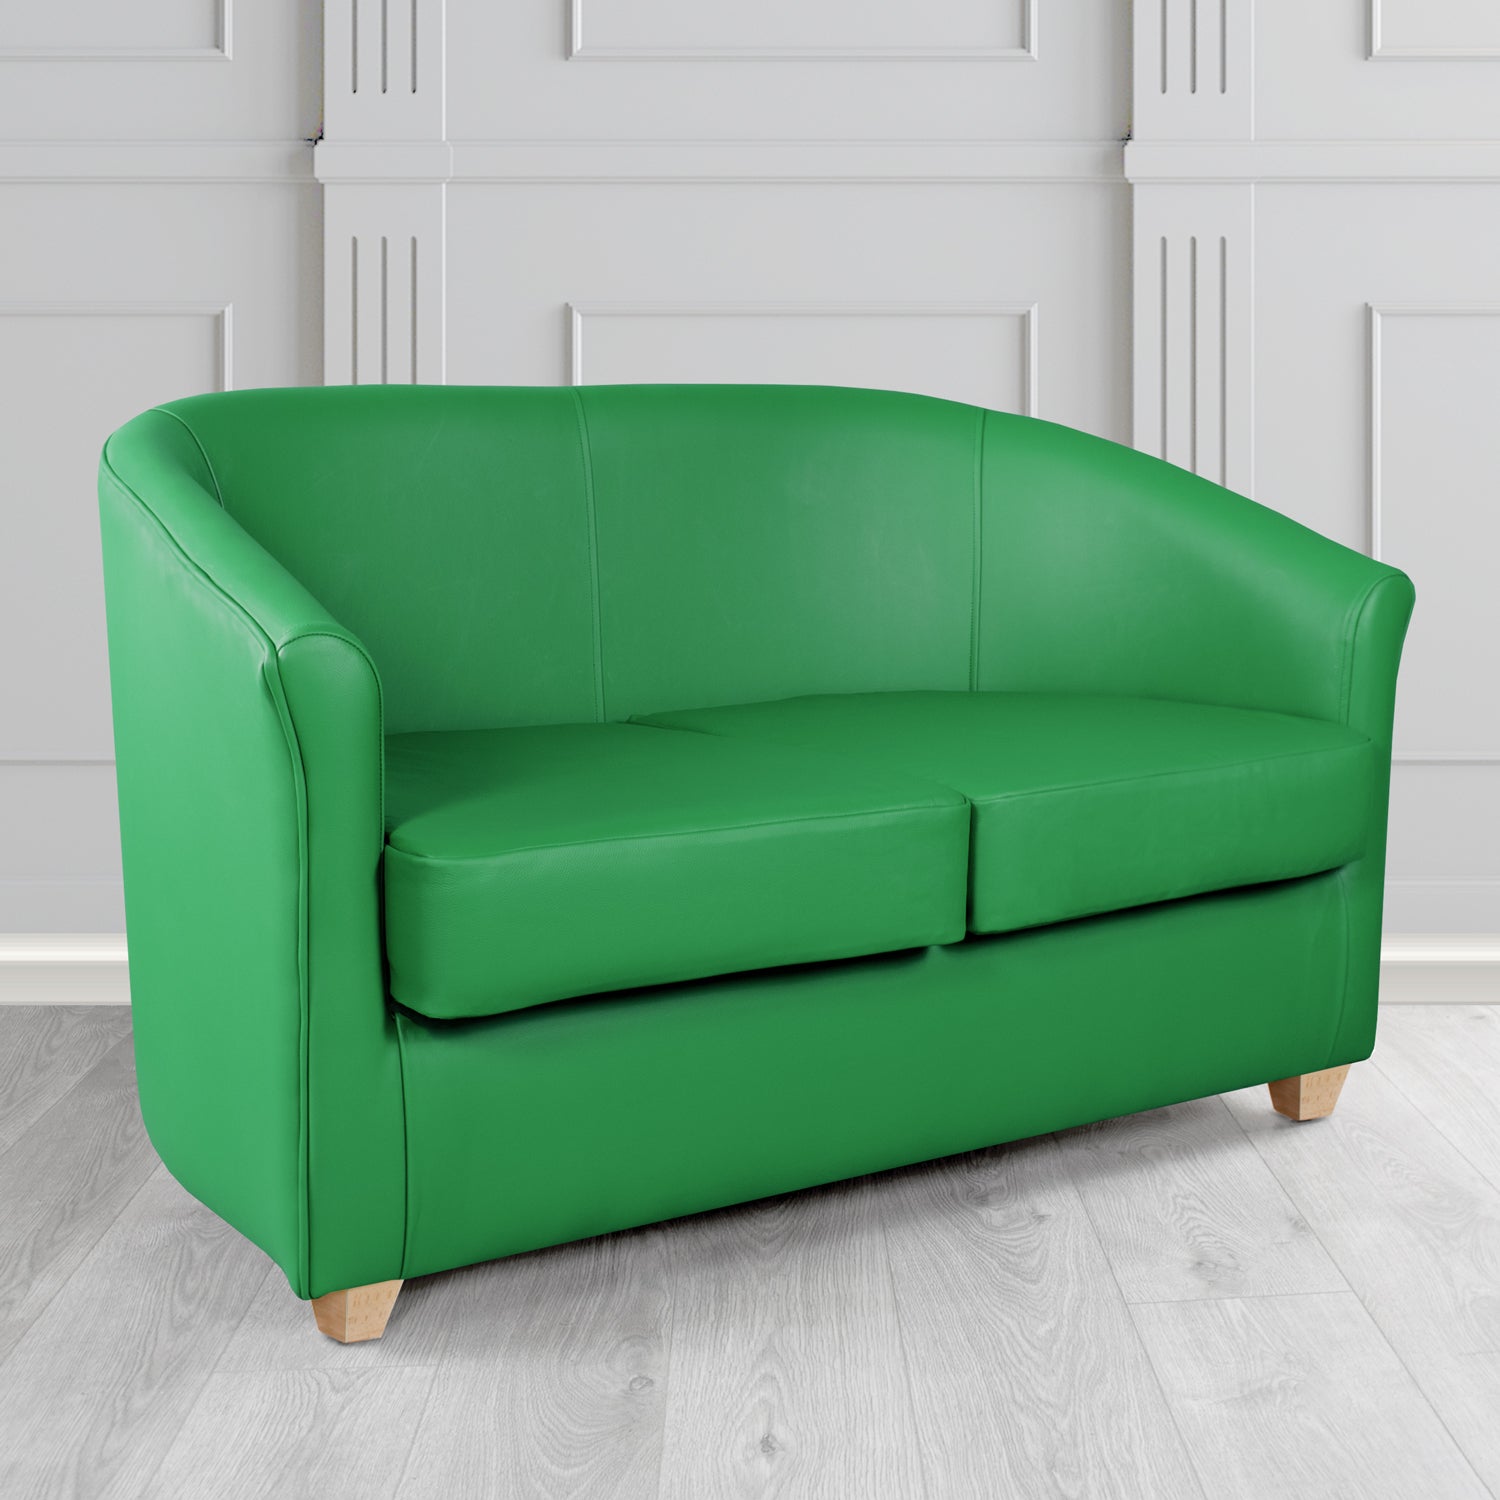 Cannes 2 Seater Tub Sofa in Just Colour Eden Crib 5 Faux Leather - The Tub Chair Shop